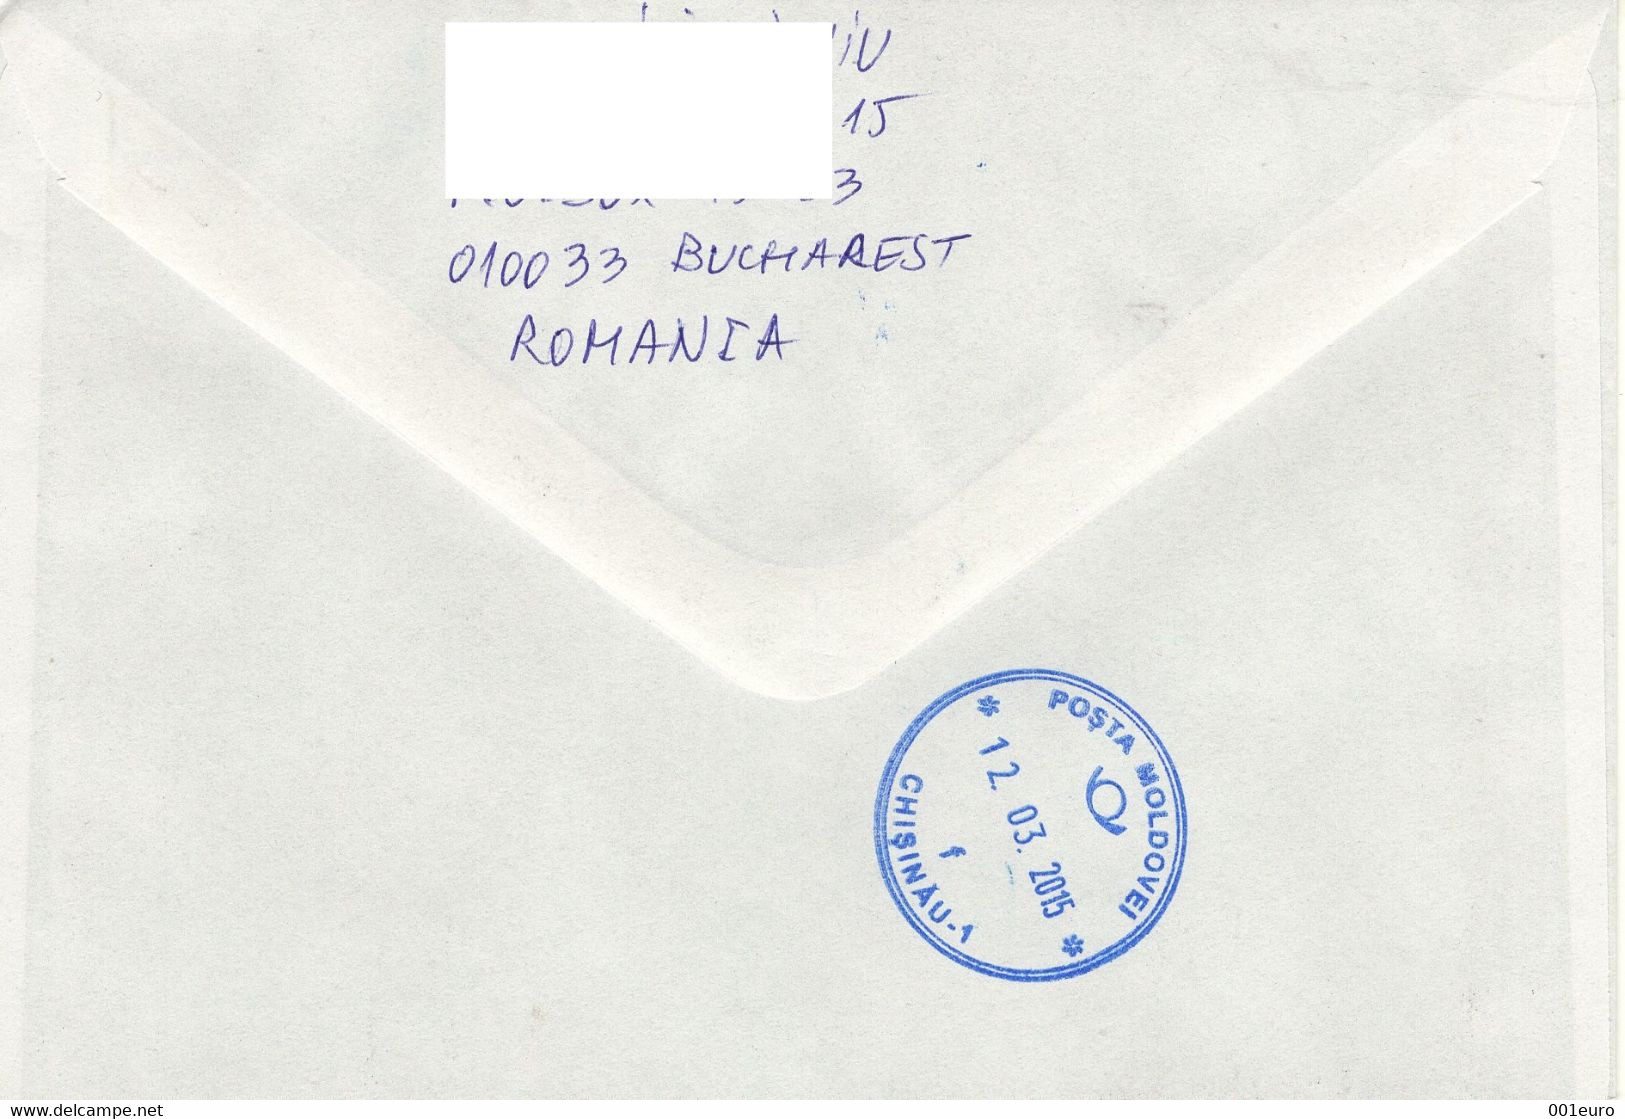 ROMANIA 2010: EUROPA - THE LETTER On REGISTERED Cover Circulated To Moldova Republic - Registered Shipping! - Covers & Documents